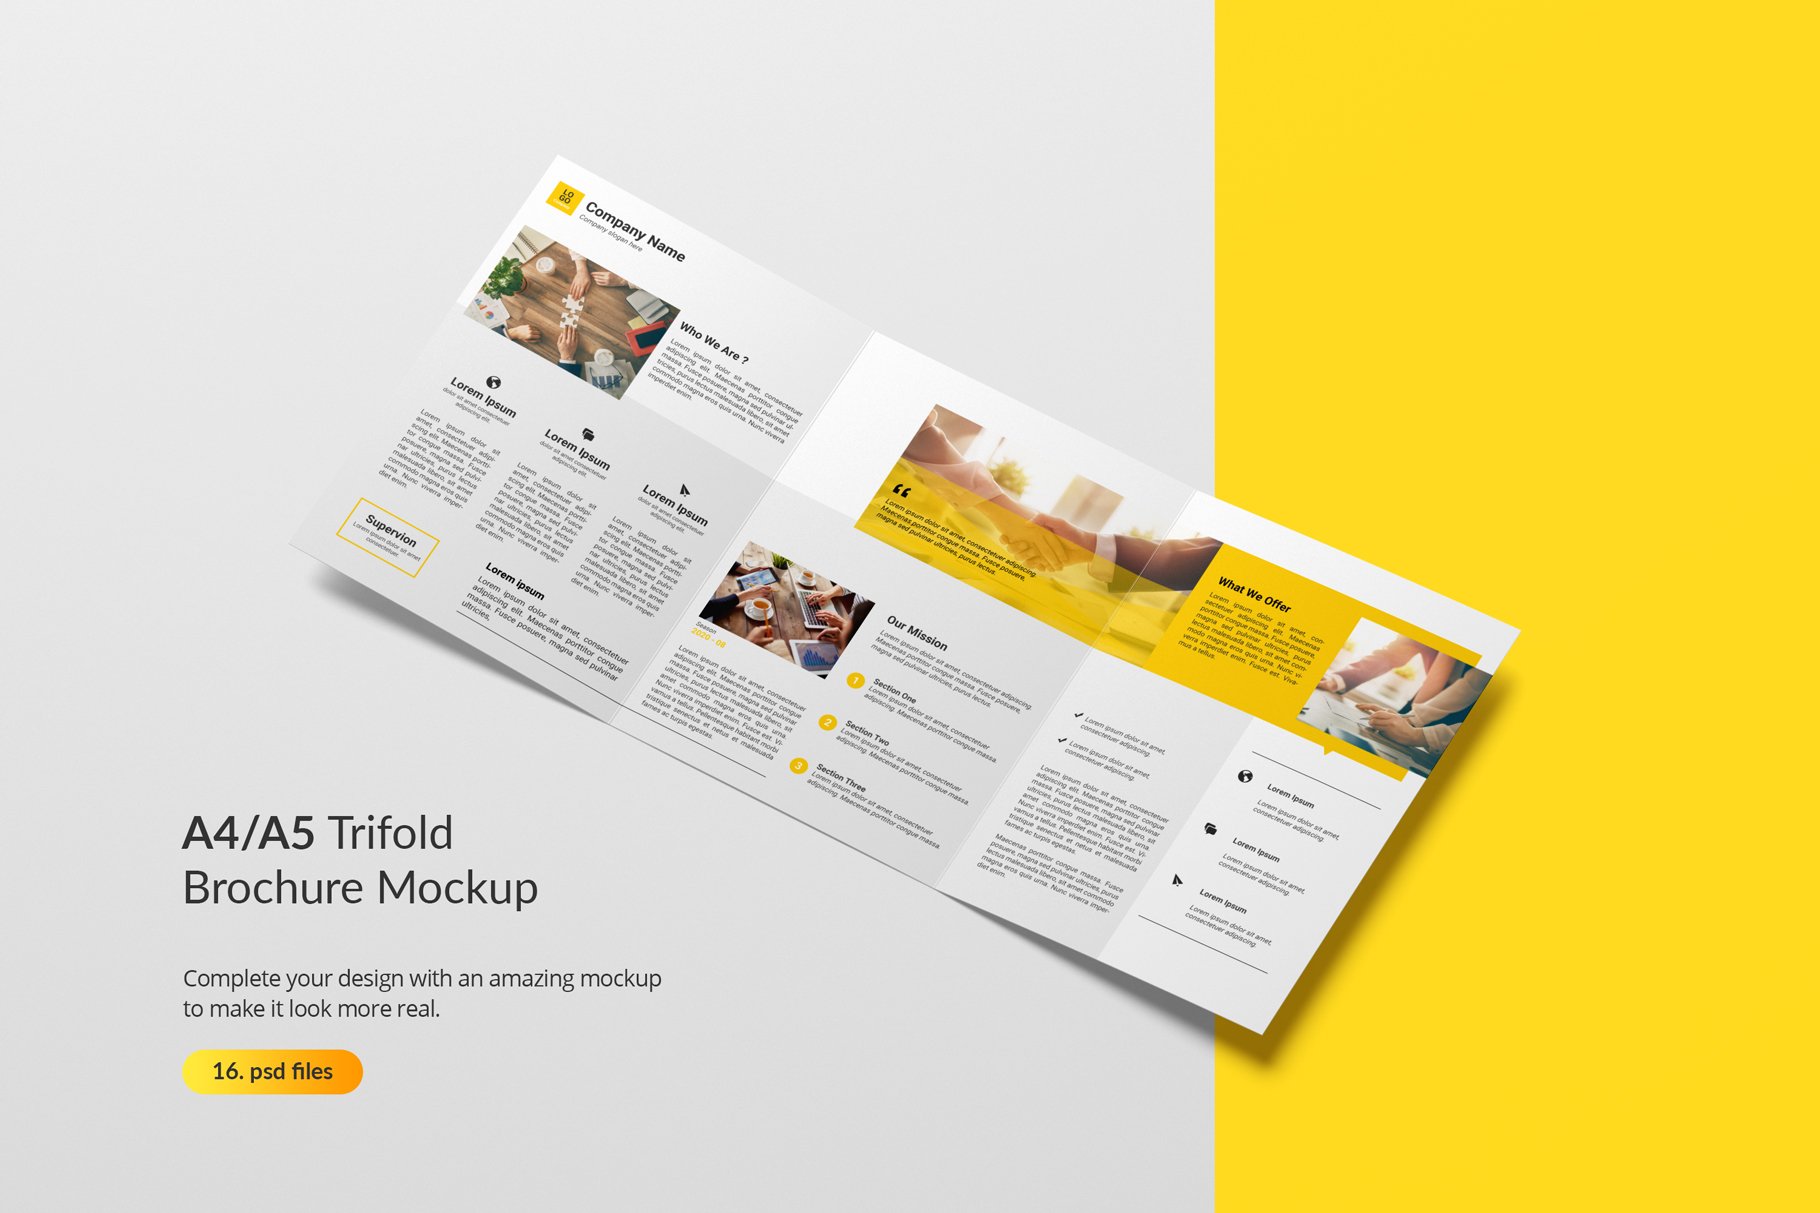 A4 / A5 Trifold Brochure Mockup cover image.